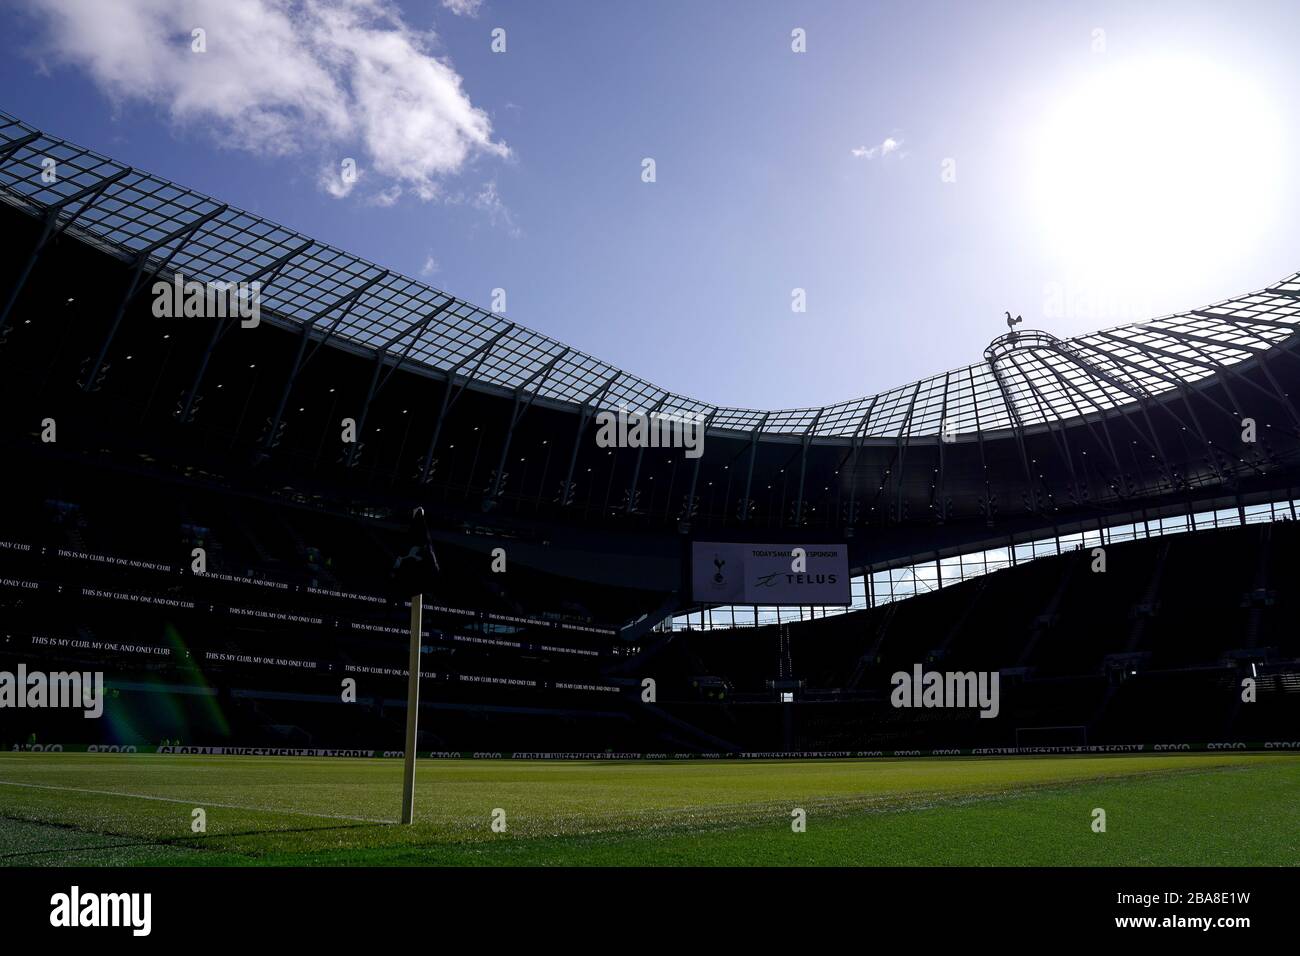 A general view of Tottenham Hotspur Stadium ahead of the match Stock Photo